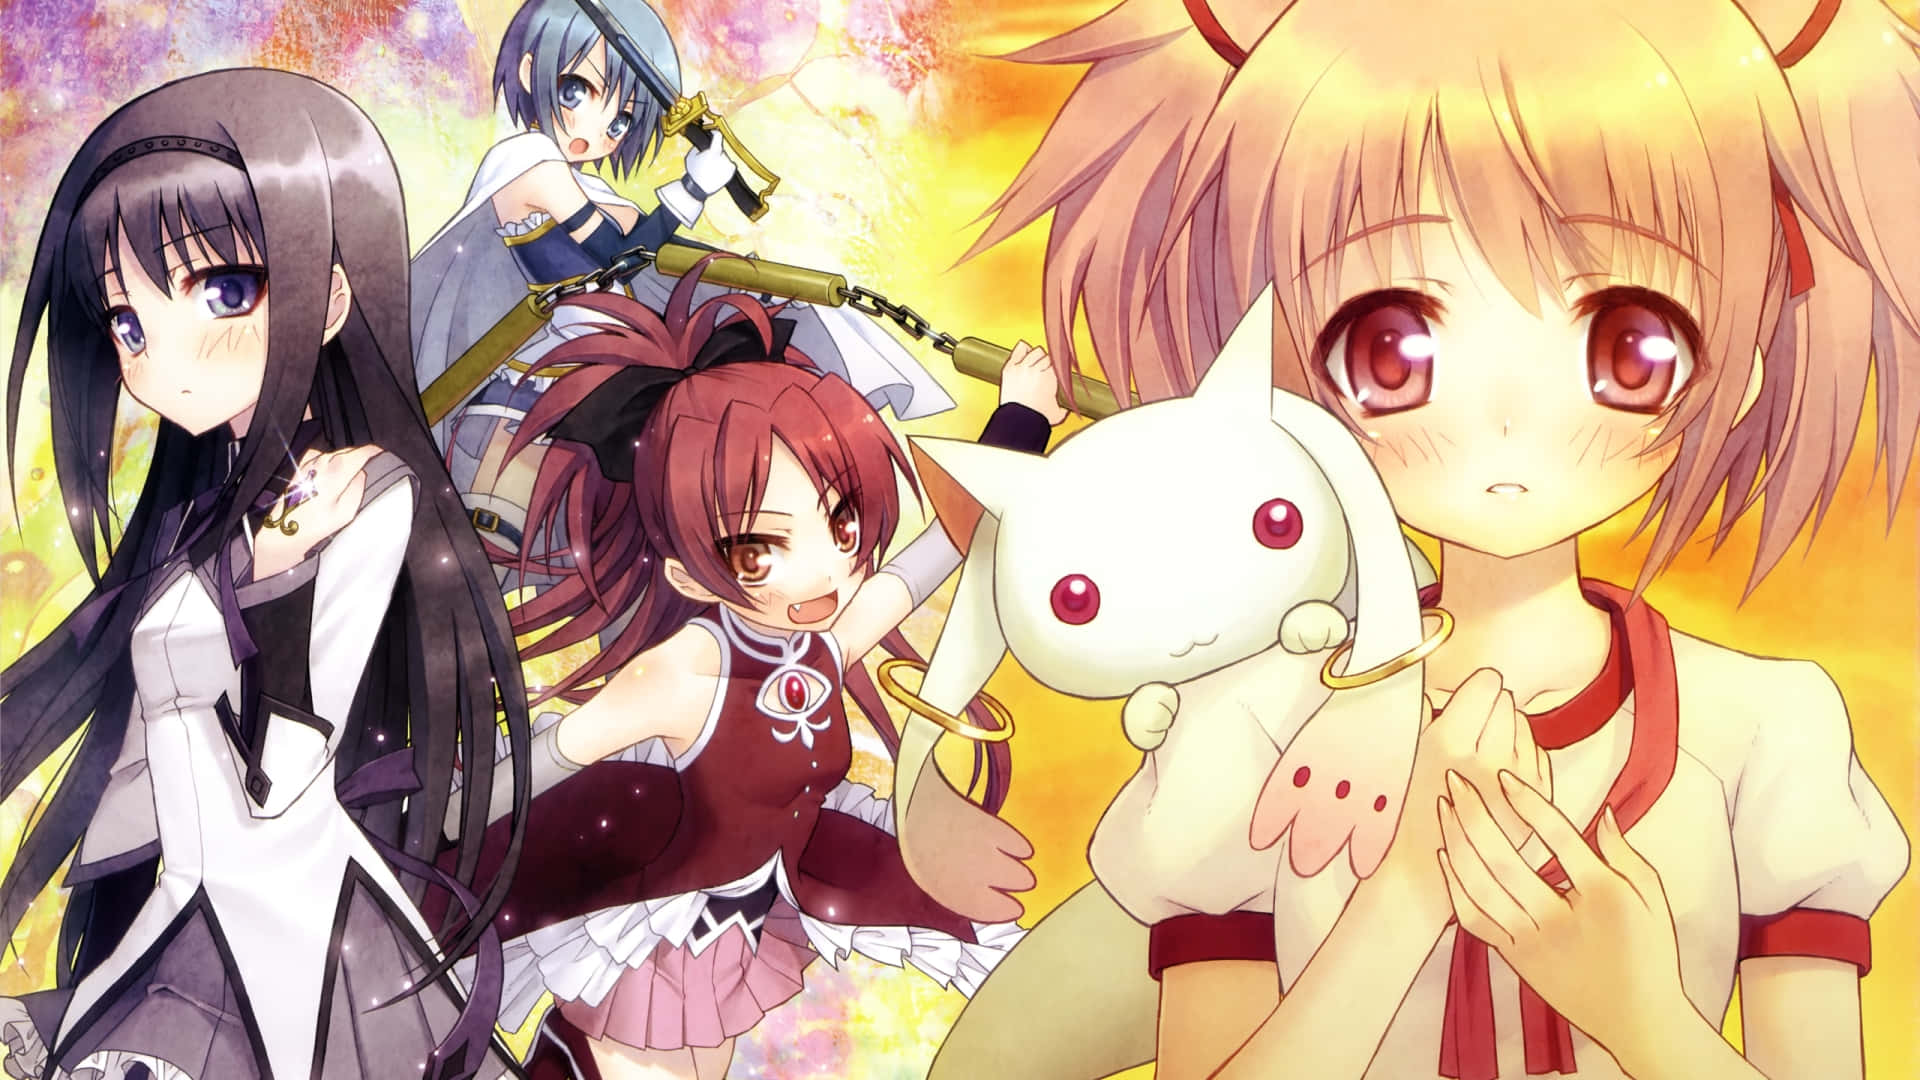 Witch's Labyrinth from the magical world of Madoka Magica